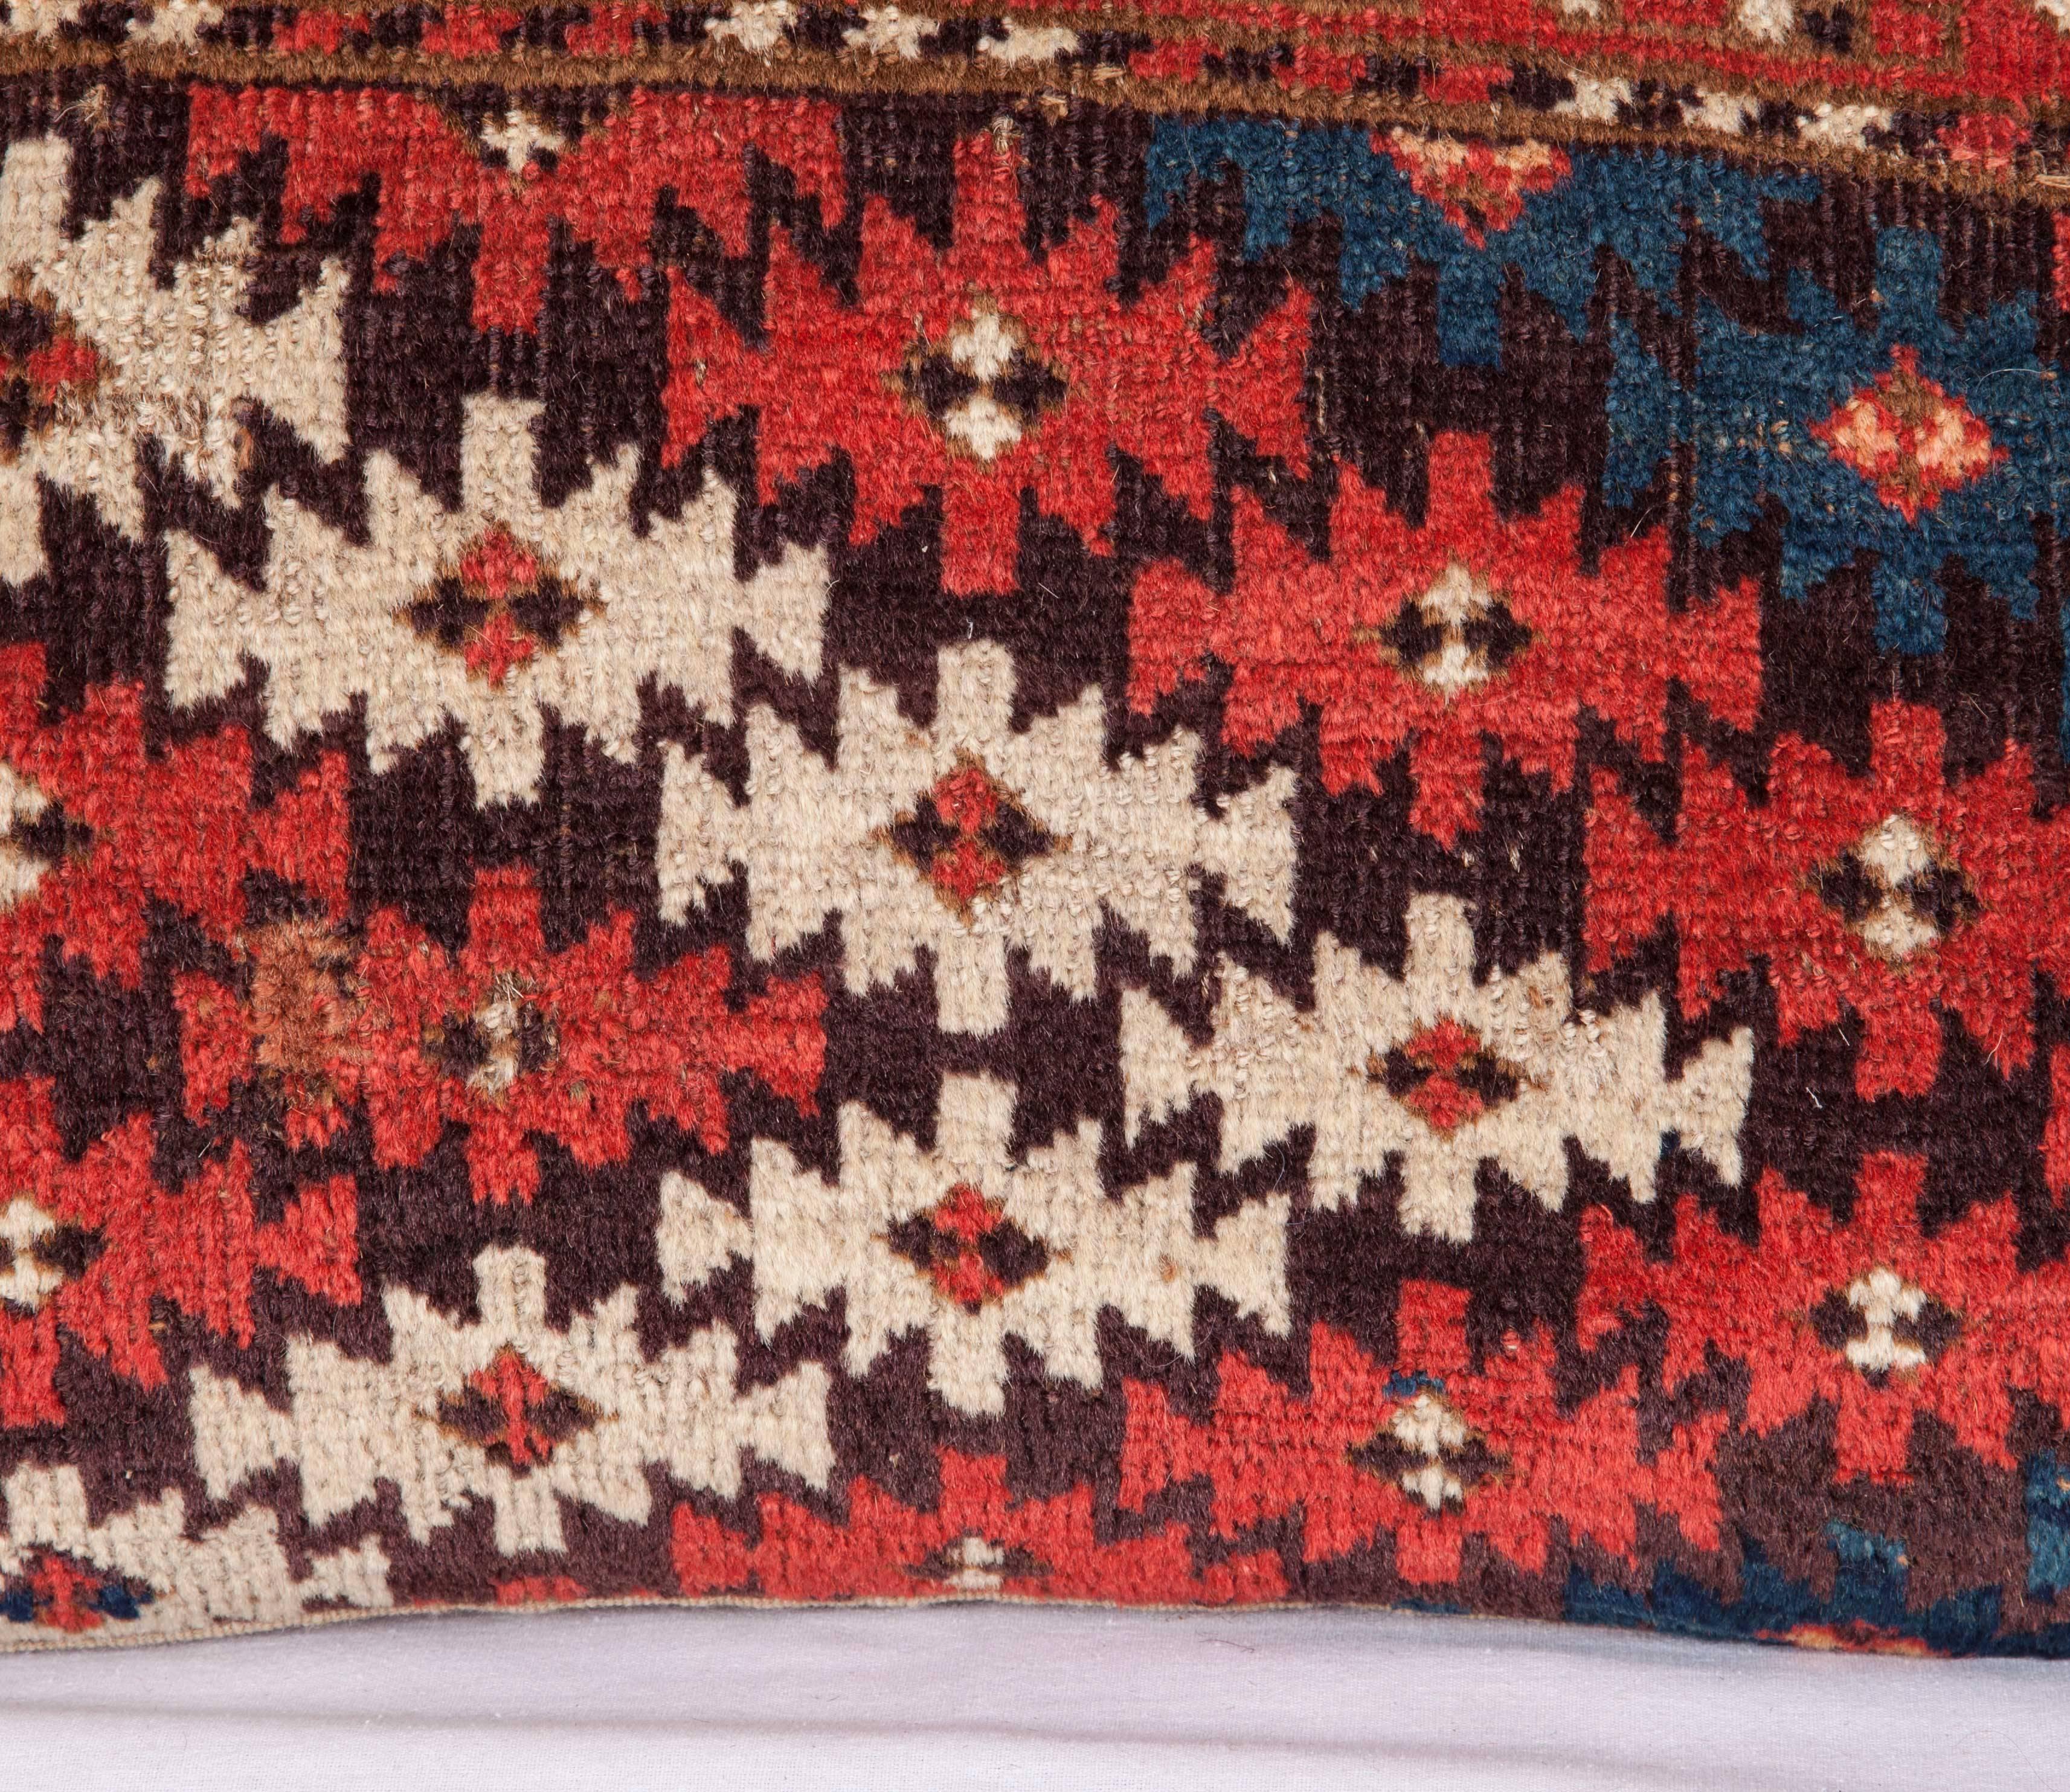 Woven Pillows Made Out of a 19th Century Turkmen Chodor Tribe Main Rug Fragment